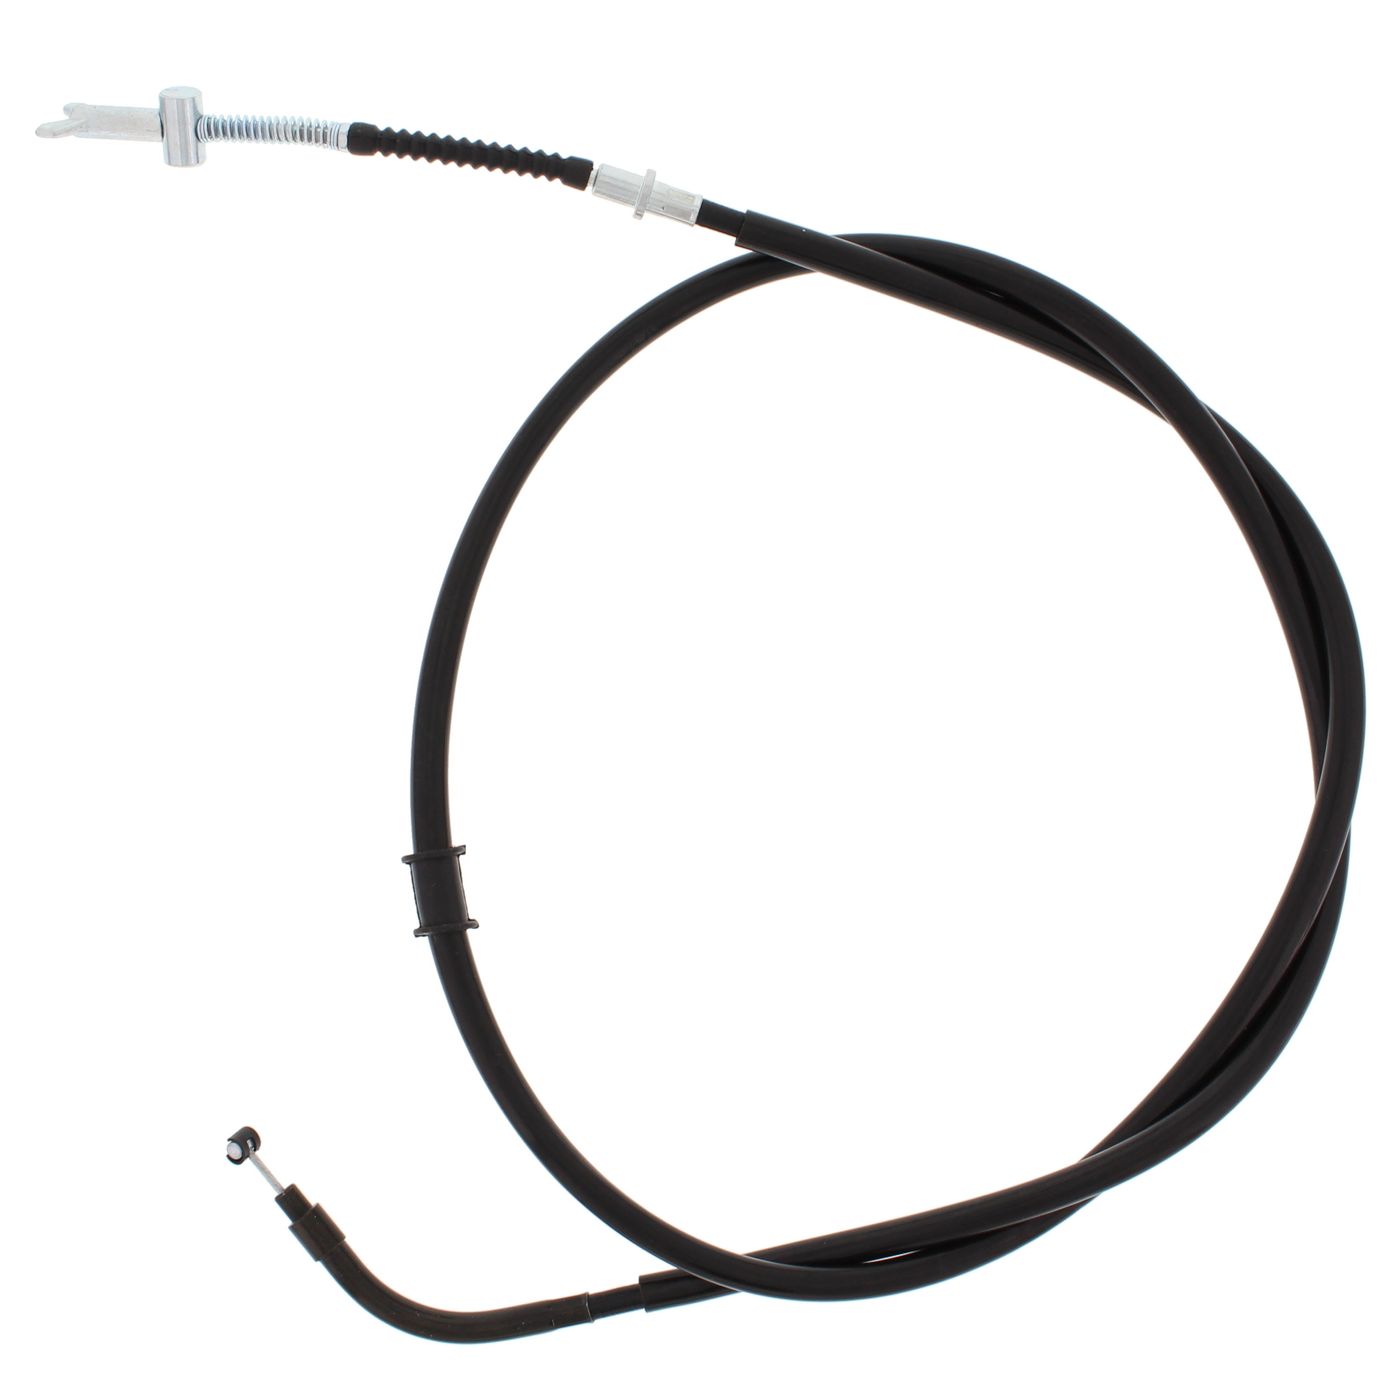 Wrp Brake Cables - WRP454041 image